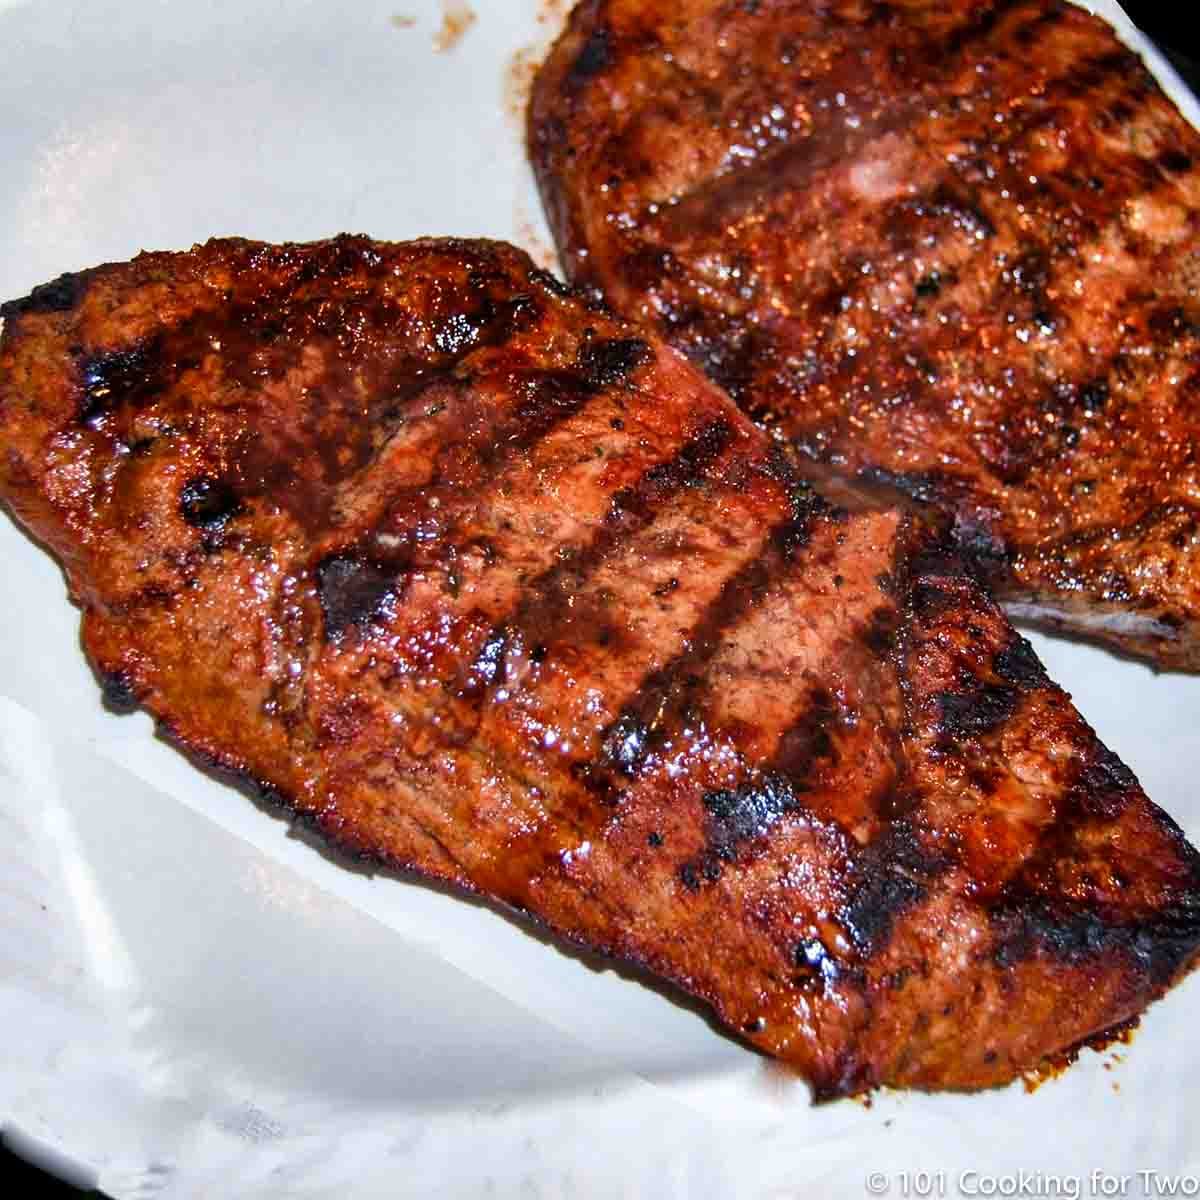 Grilled sirolin on white plate.